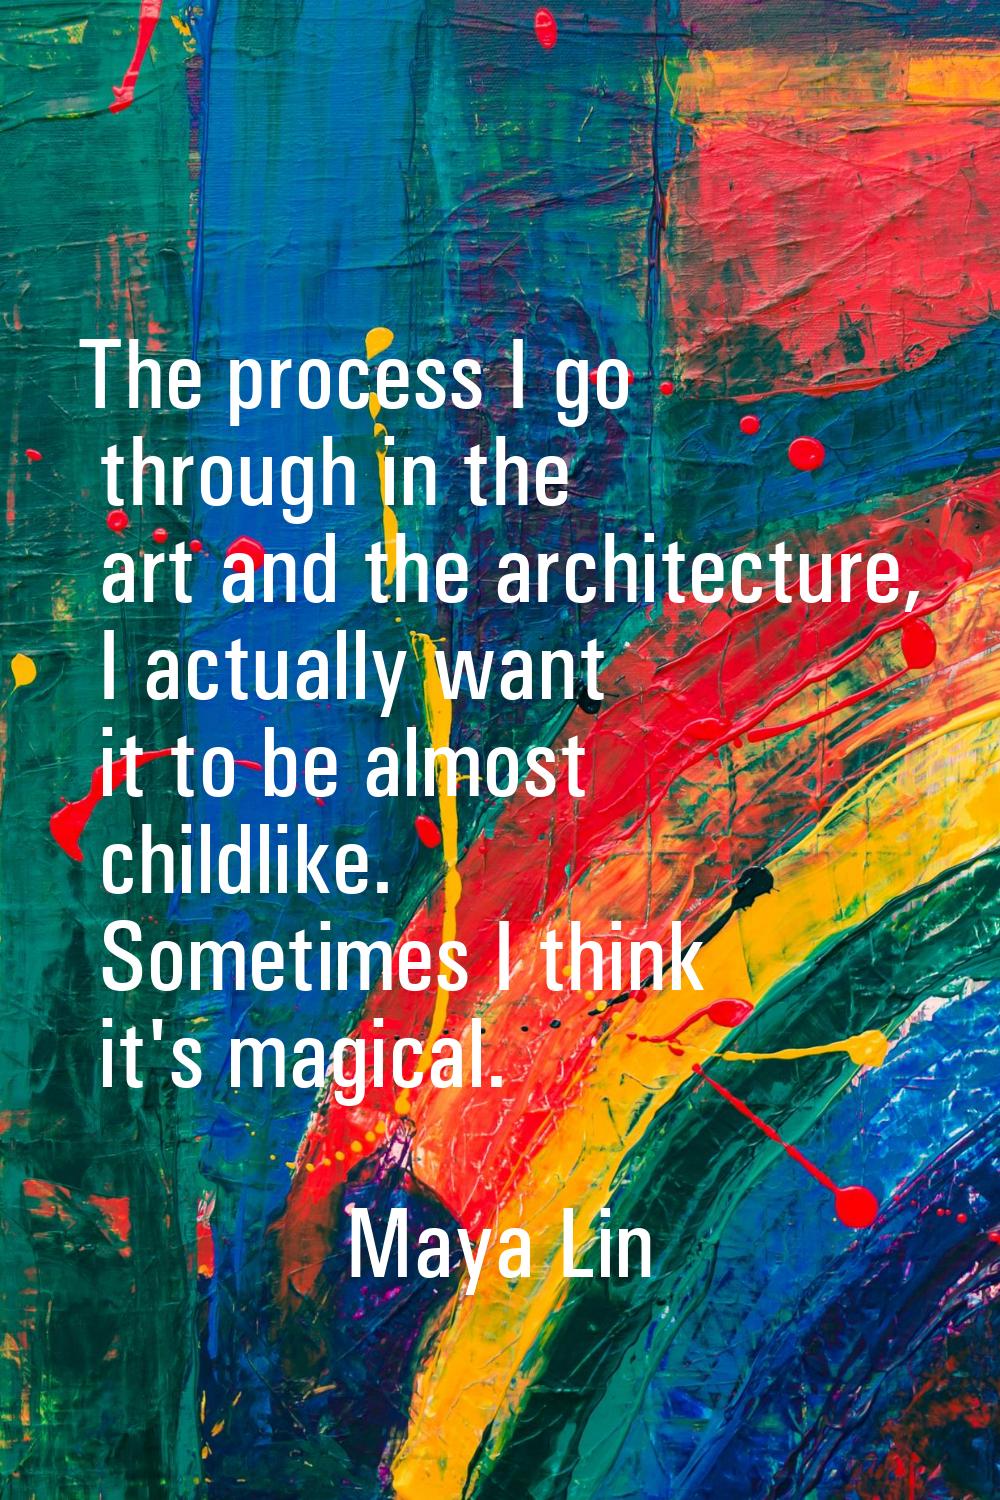 The process I go through in the art and the architecture, I actually want it to be almost childlike